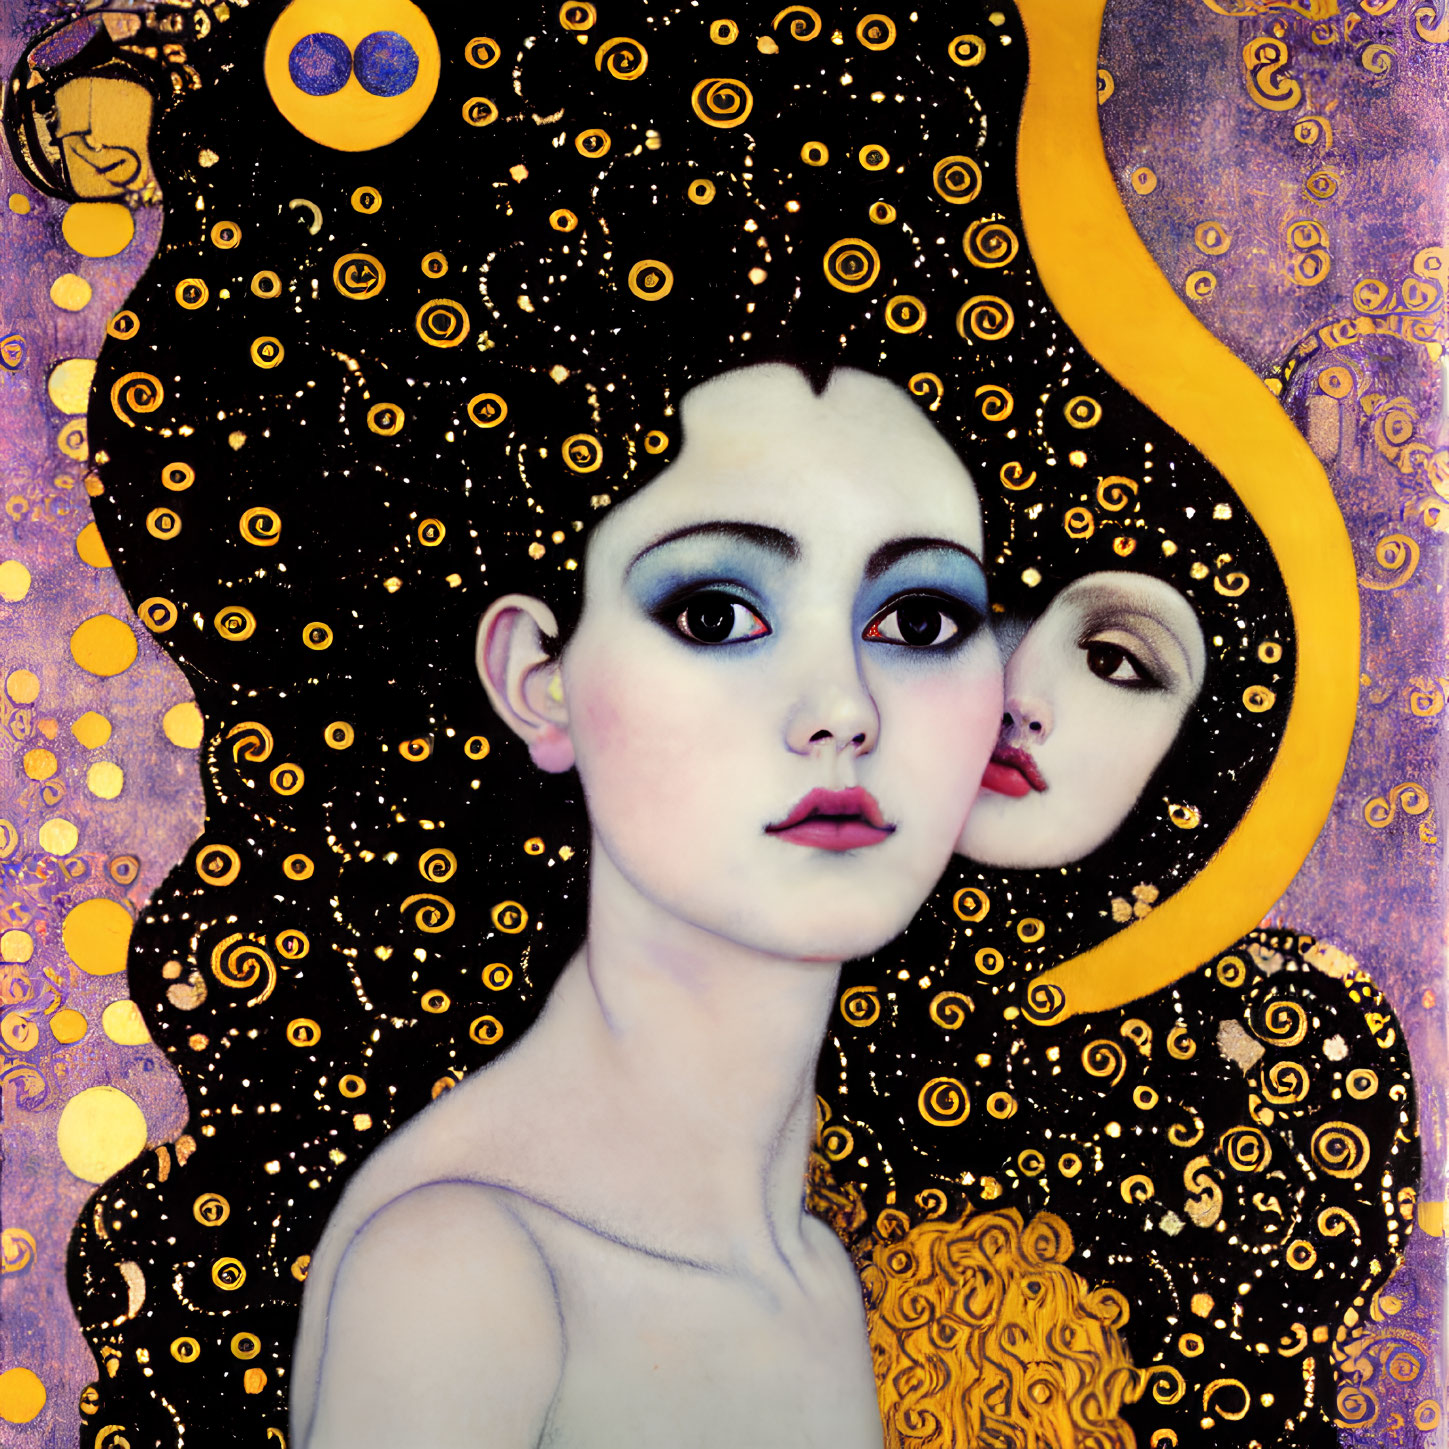 Stylized painting of two faces with large eyes and swirling yellow patterns on a dark background.